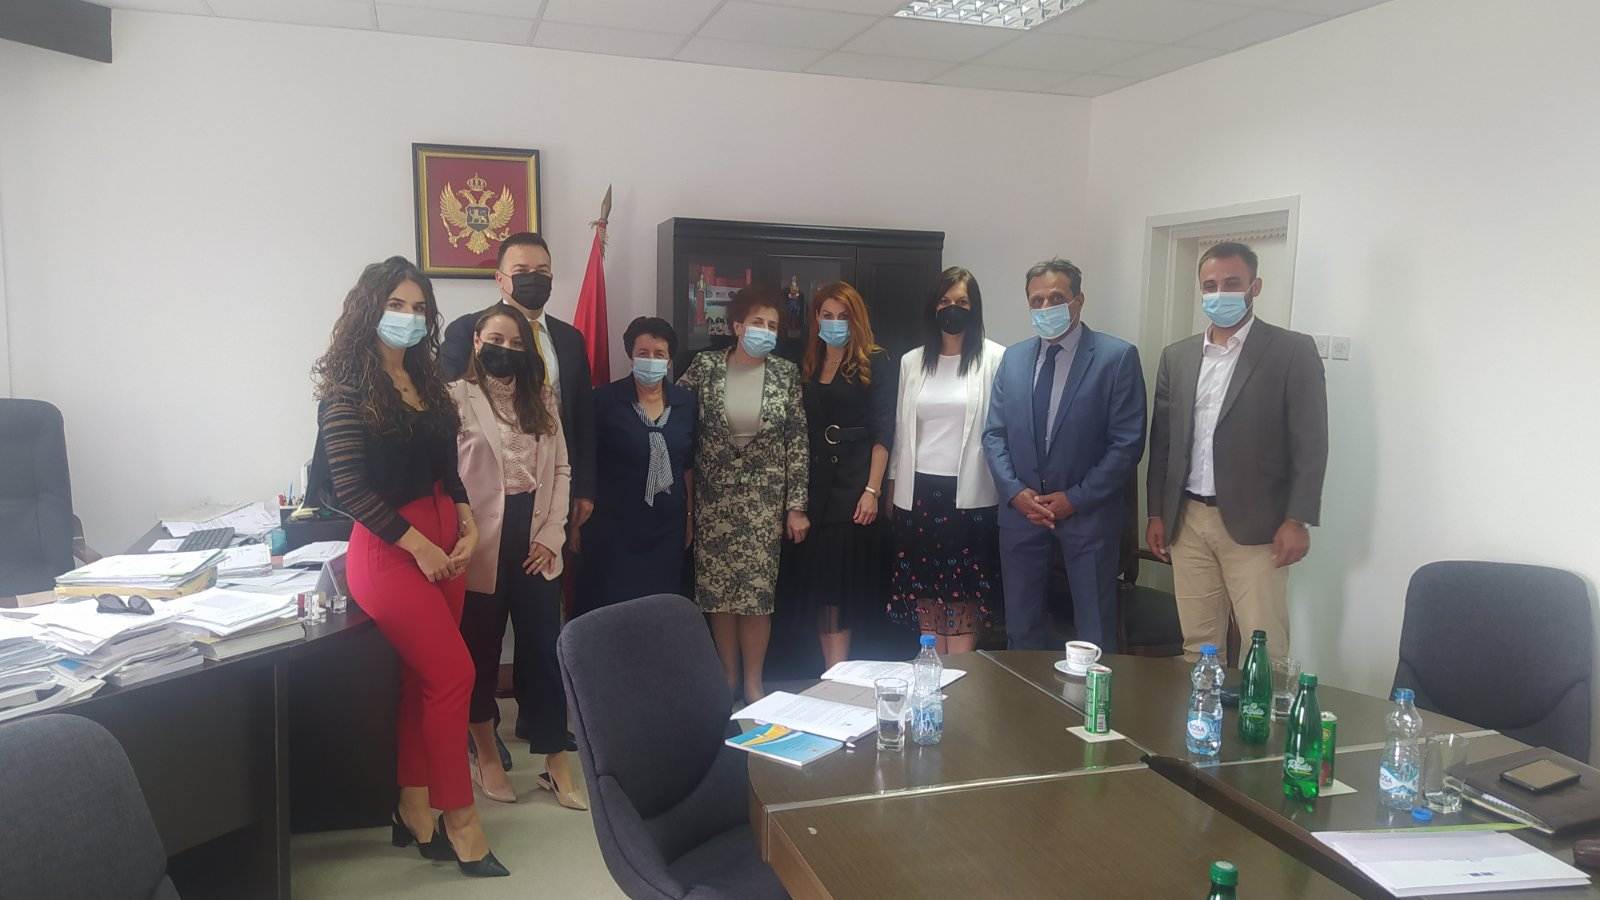 Last round of counselling visits to basic courts organised in Montenegro